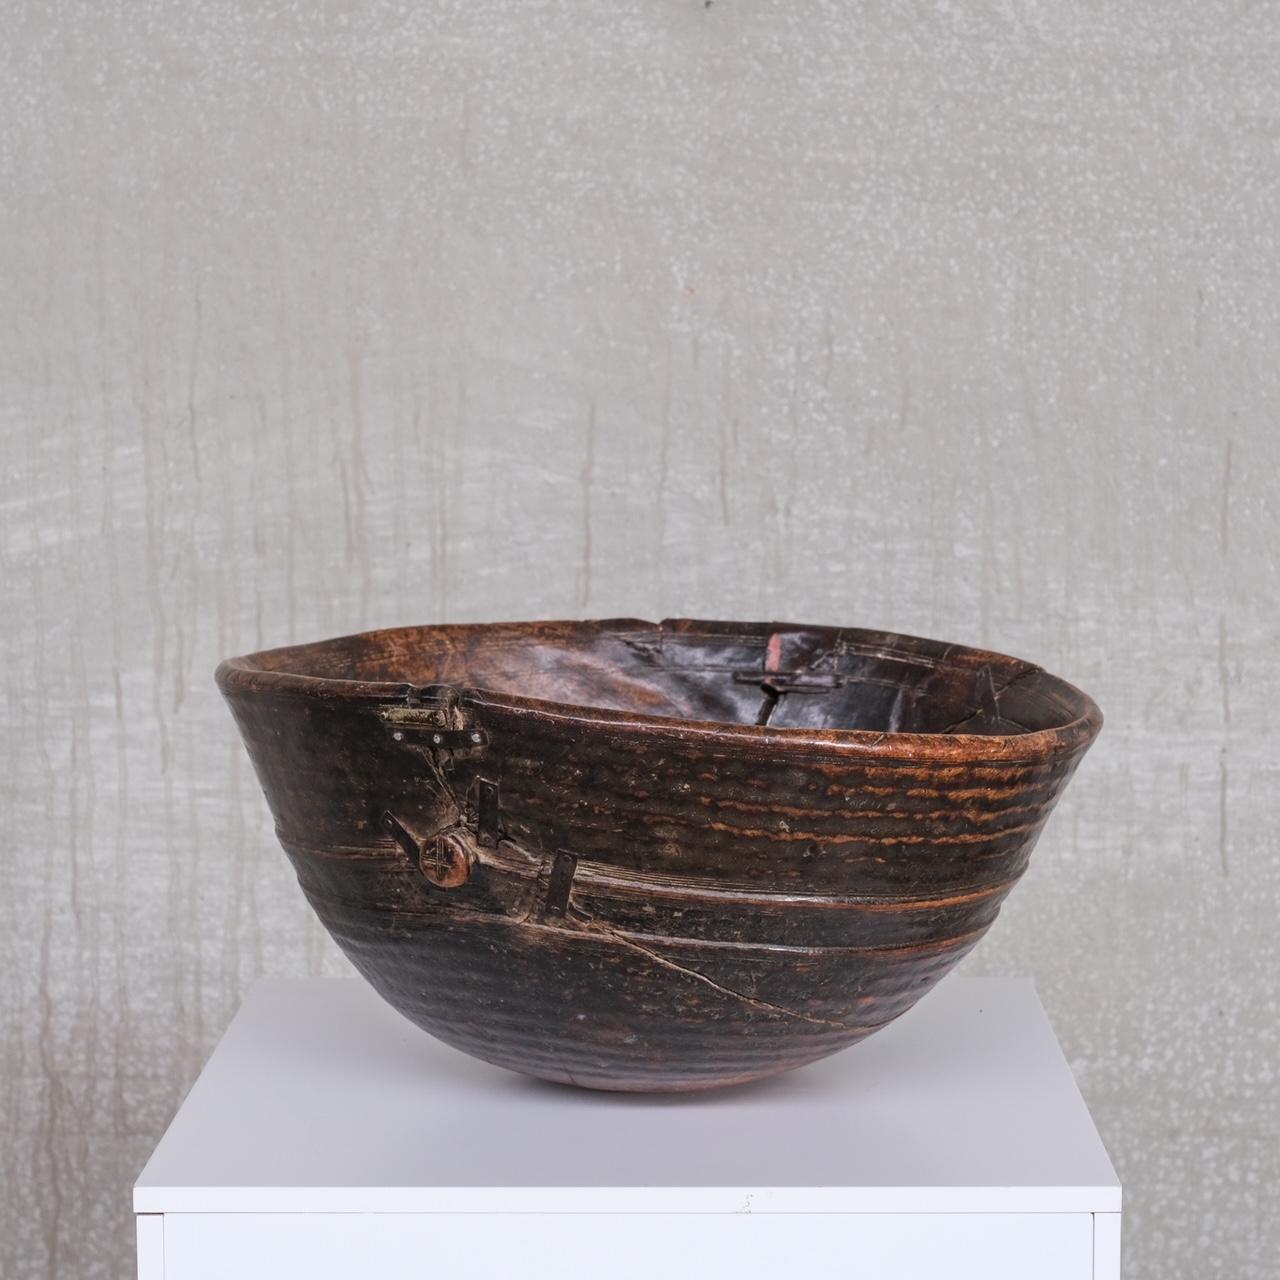 A Primitive style wooden bowl. 

France, 19th century. 

Good size, with historical repairs adding to the character. 

Some wear and historical woodworm (since treated) commensurate with age, but generally good condition. 

Location: Belgium